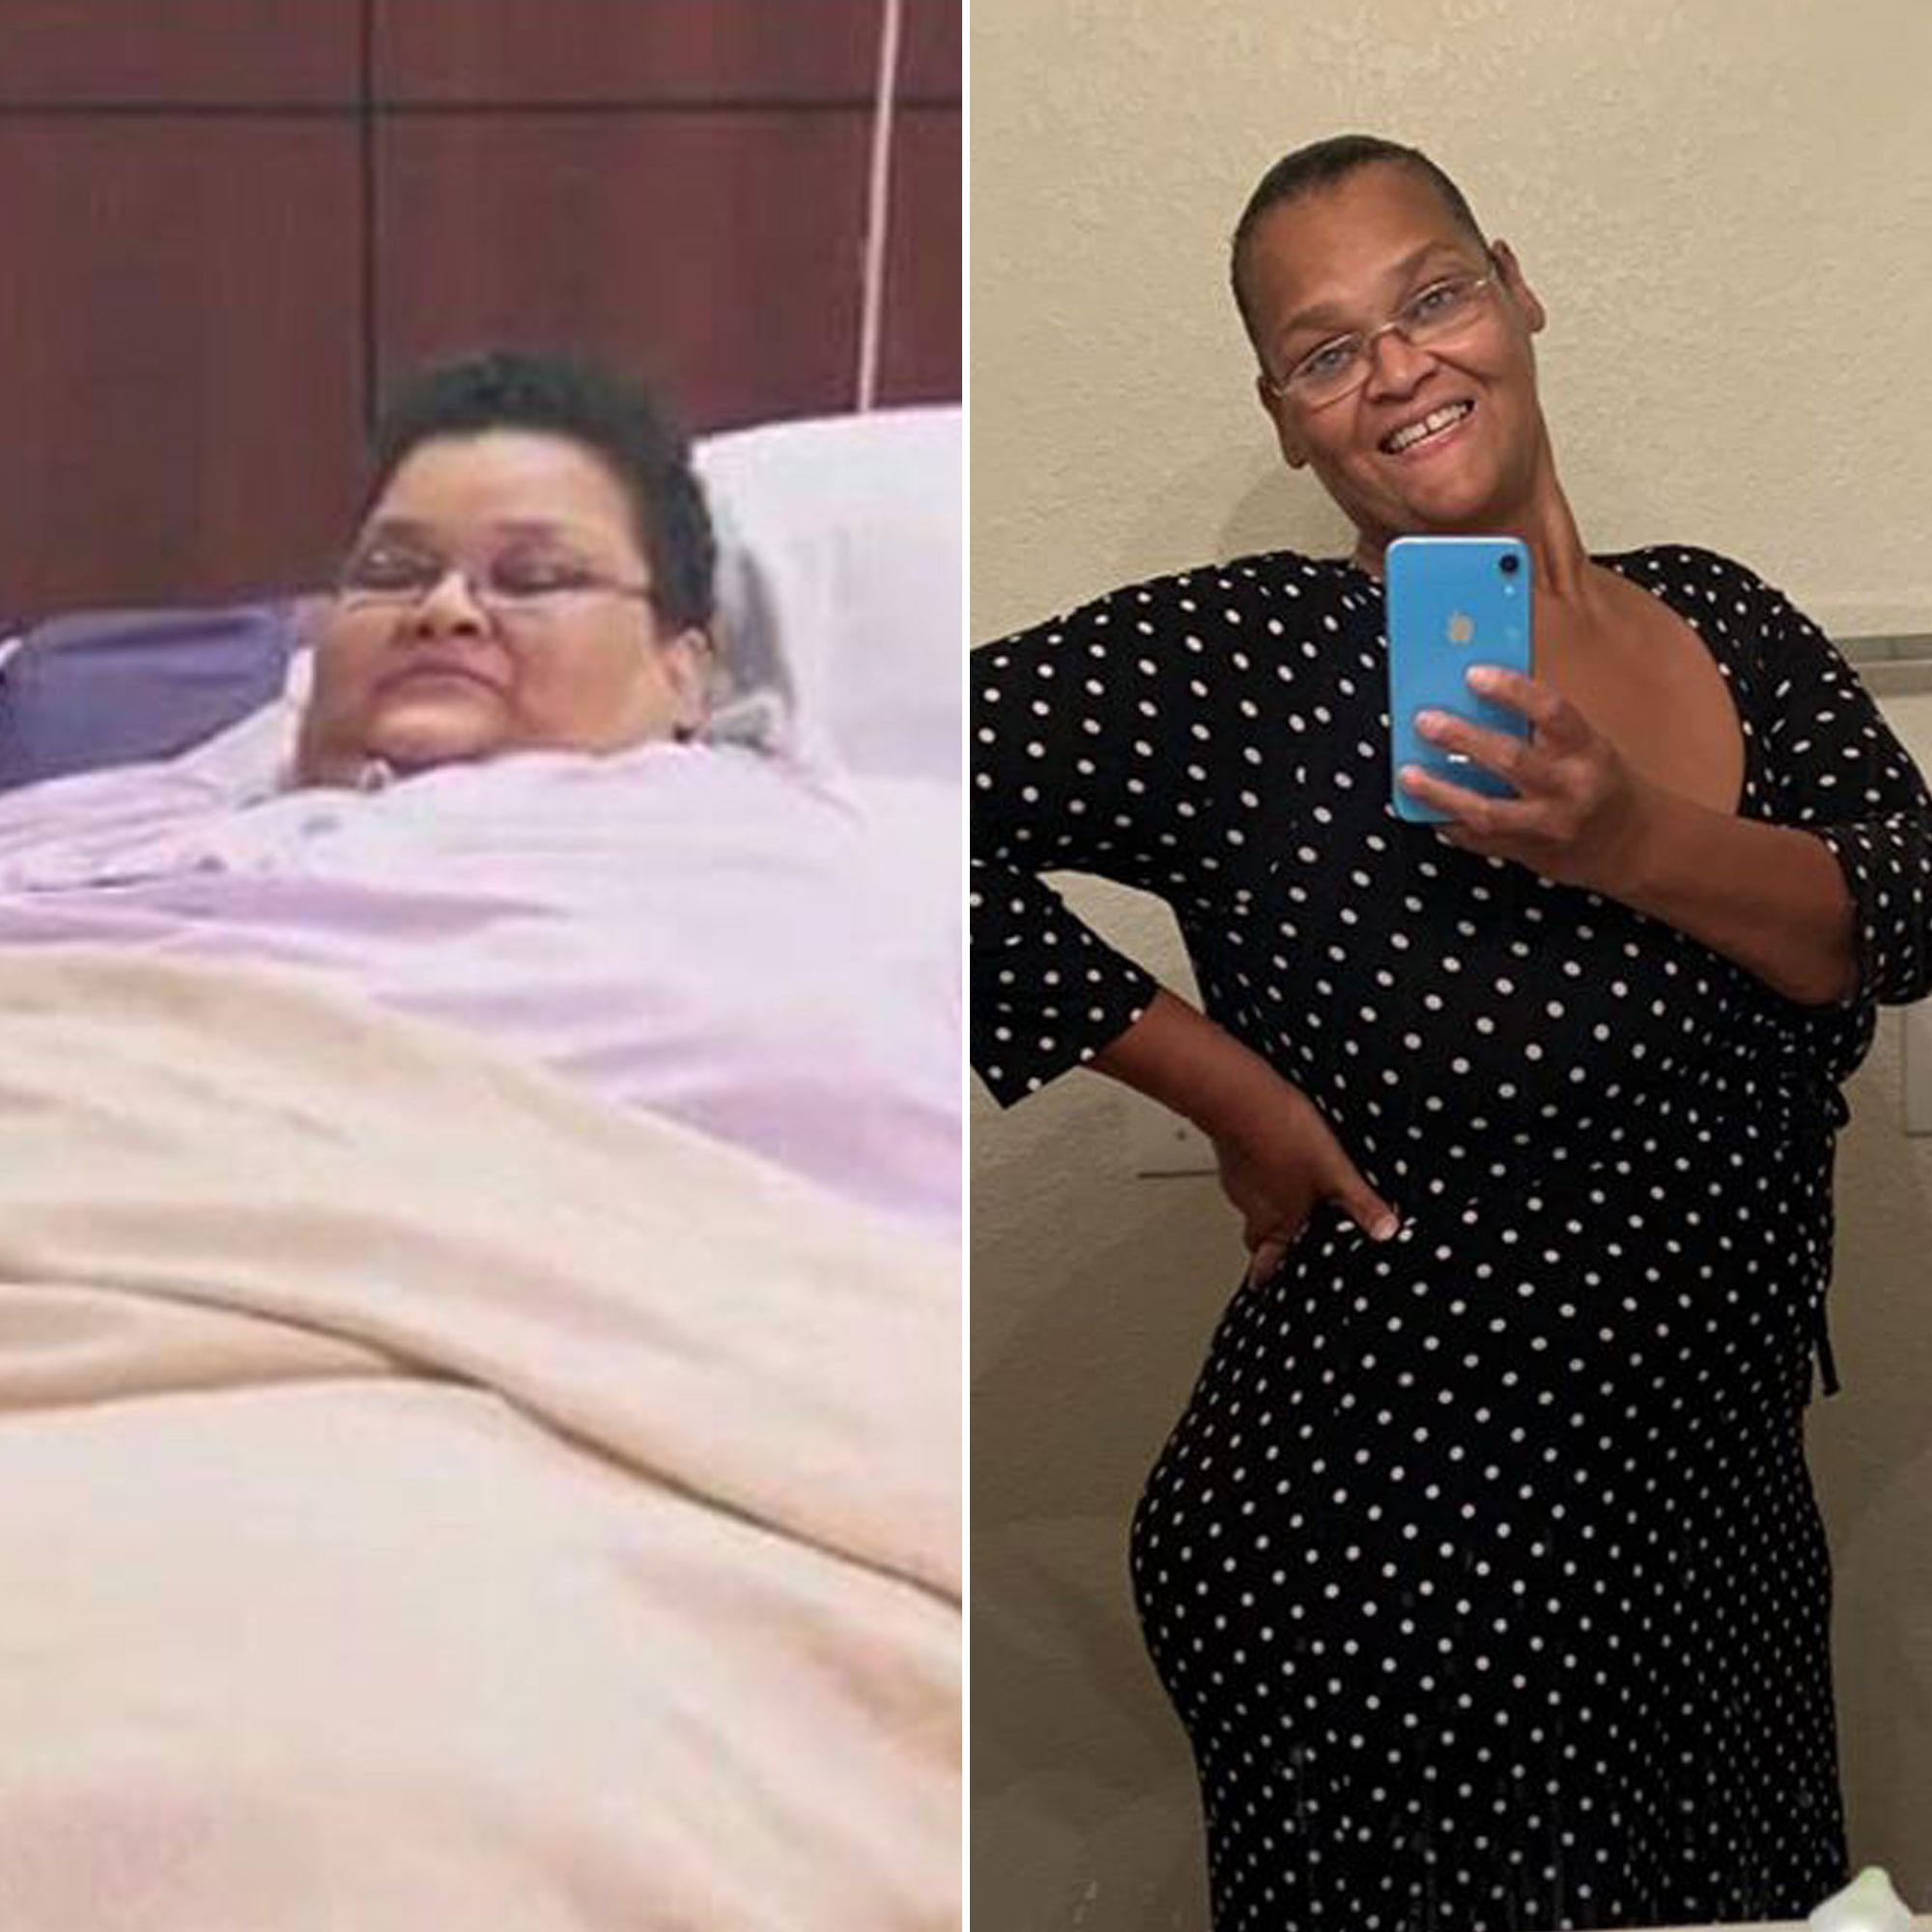 OMG DR. NOW'S IG POST. : r/My600lbLife